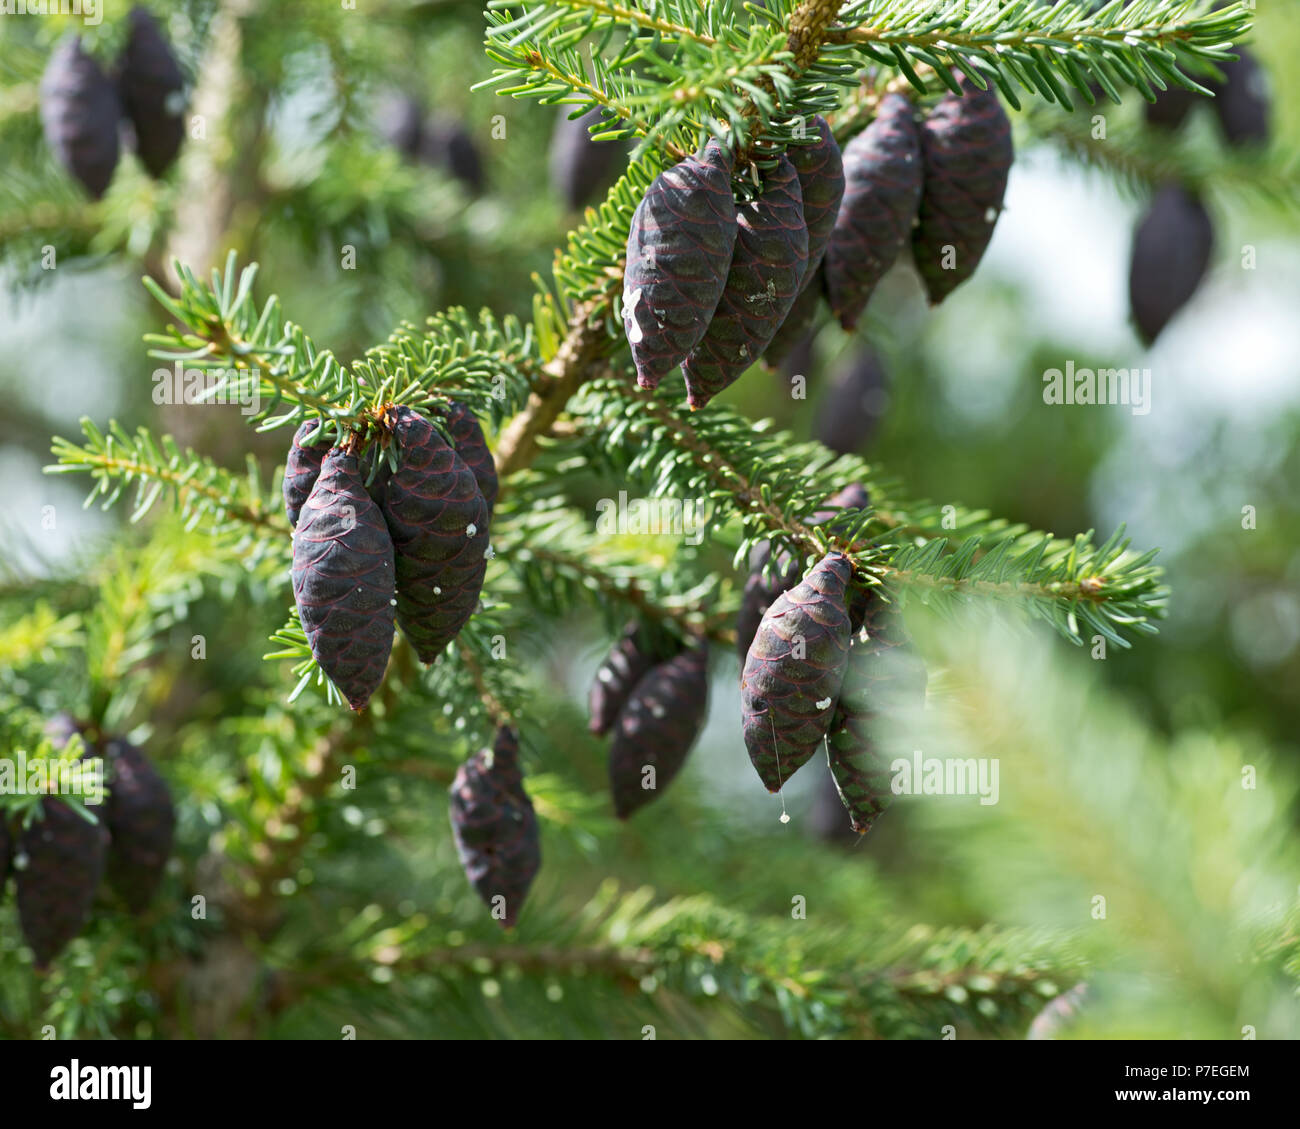 Black spruce, Picea mariana, a North American species of spruce tree in the pine family. Stock Photo